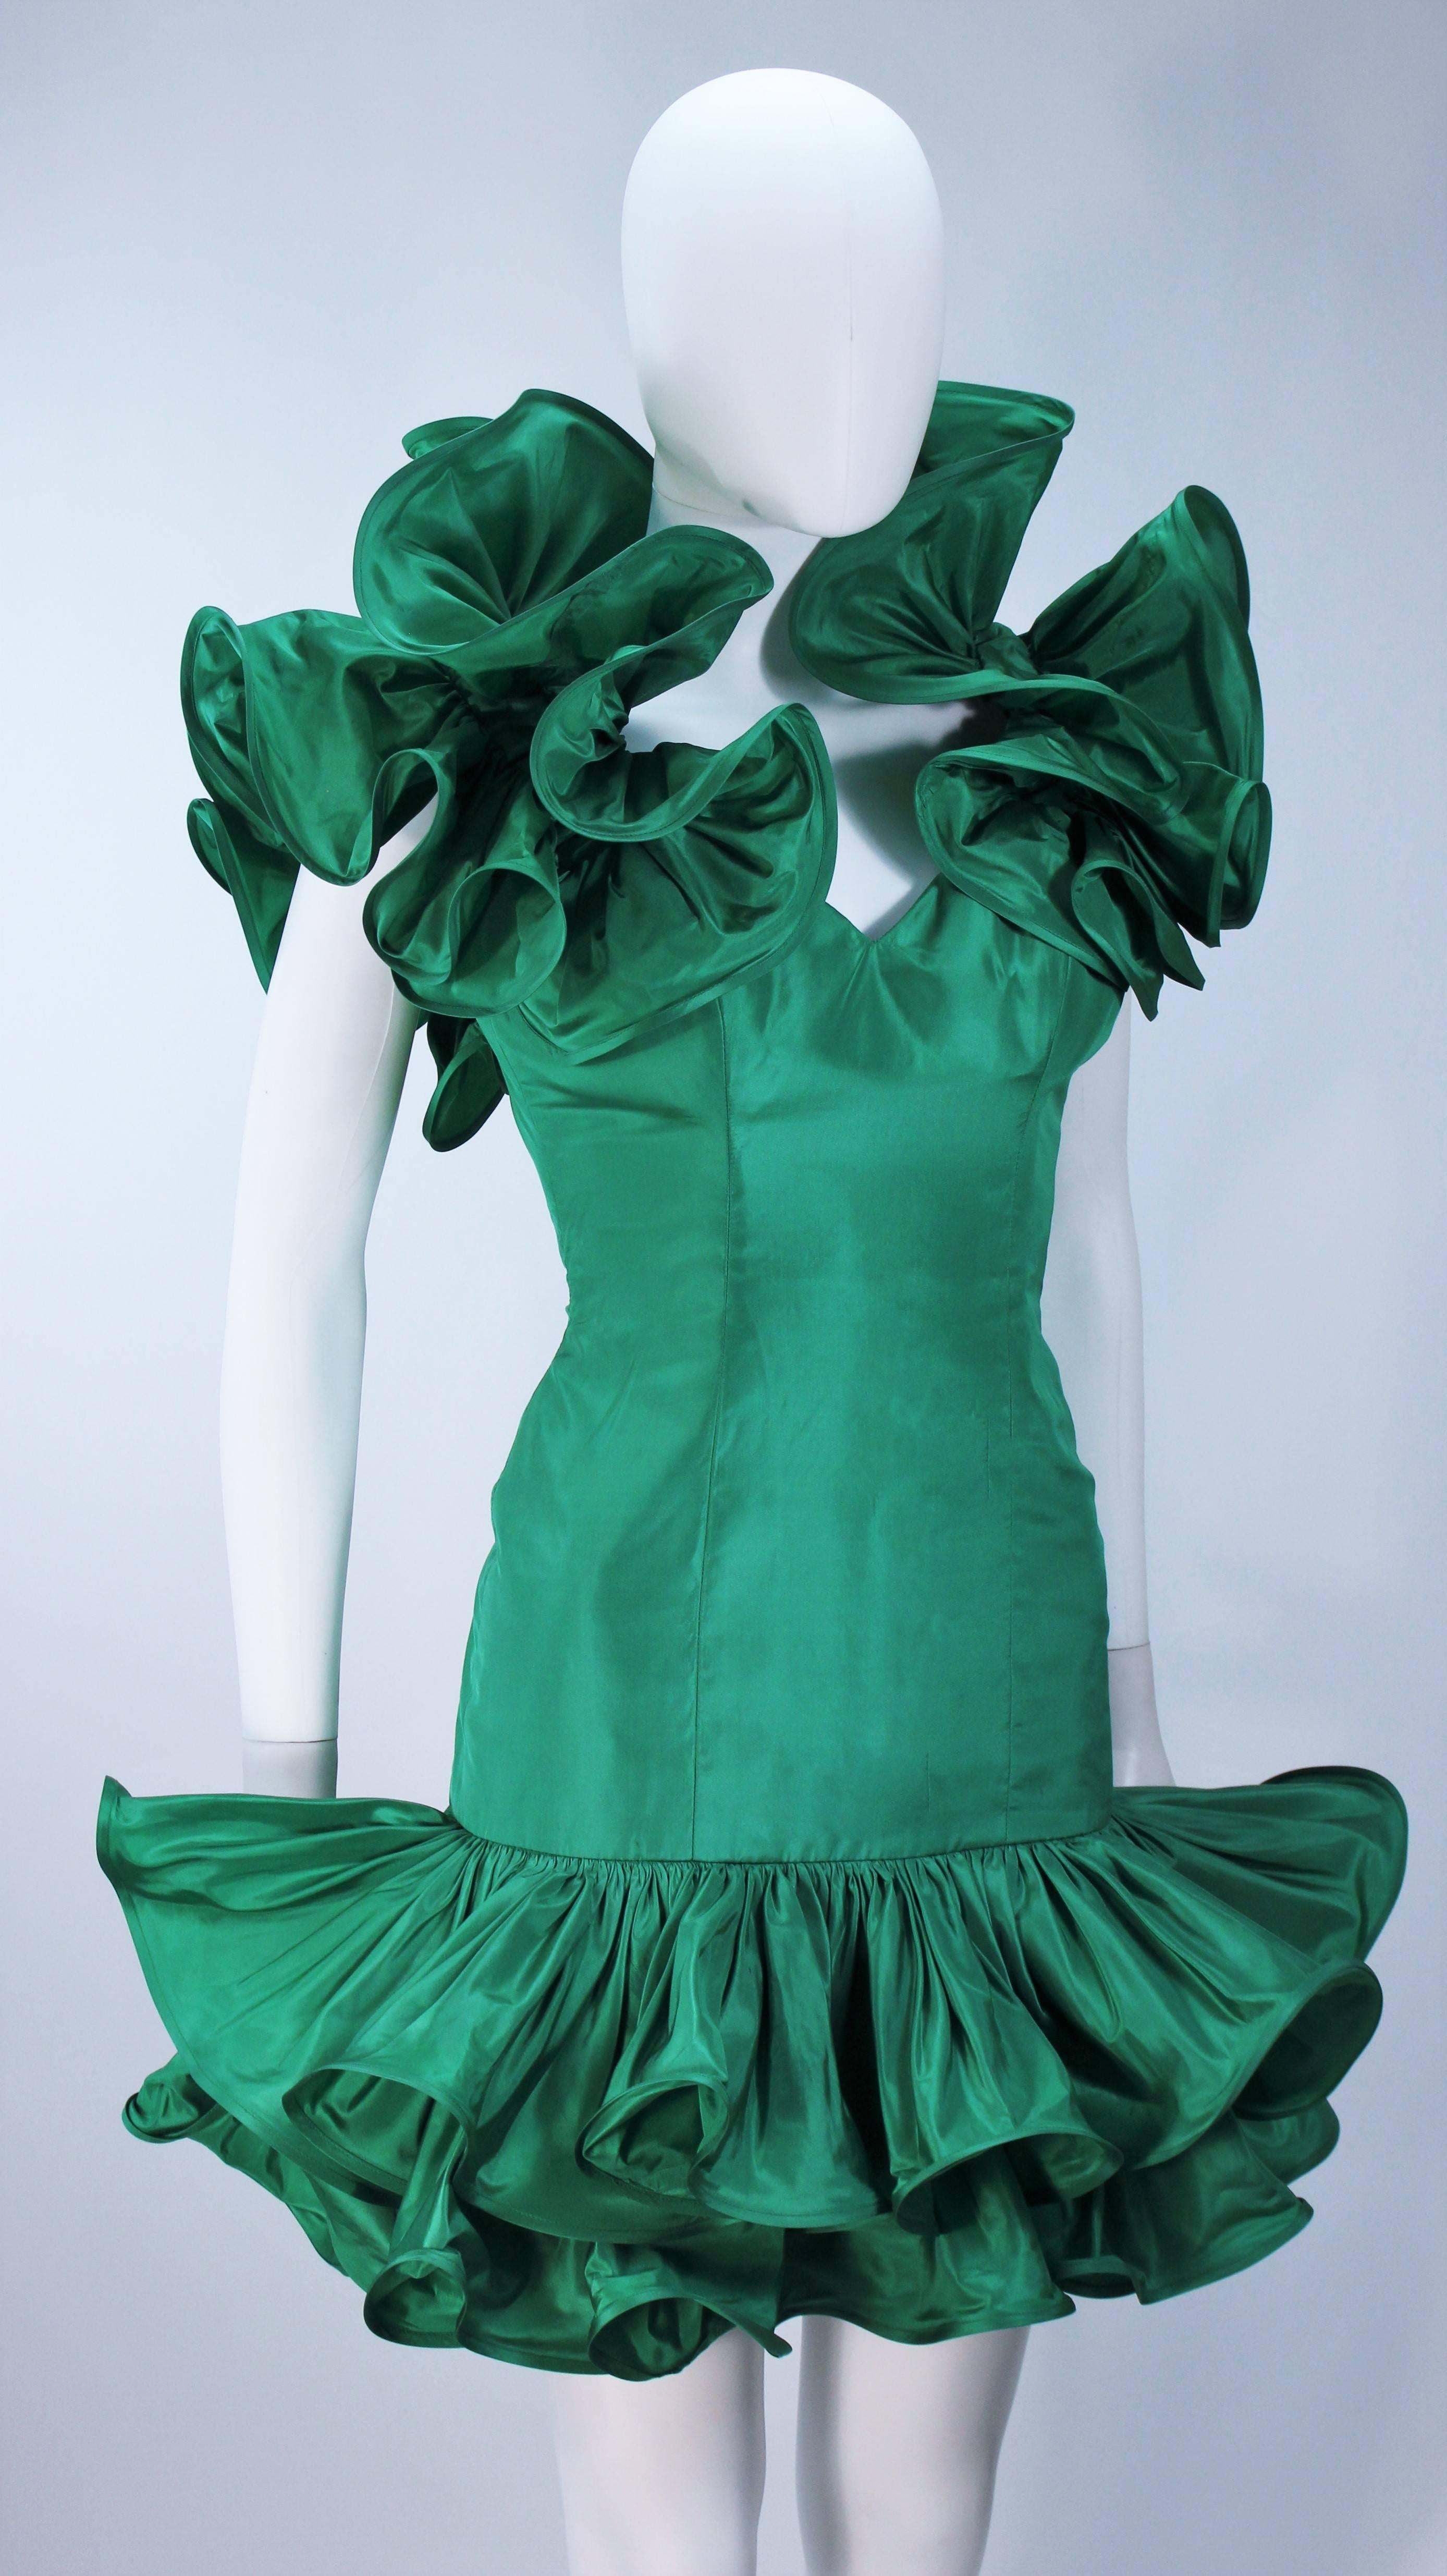 TRAVILLA Attributed Kelly Green Ruffled Cocktail Dress Size 6 1